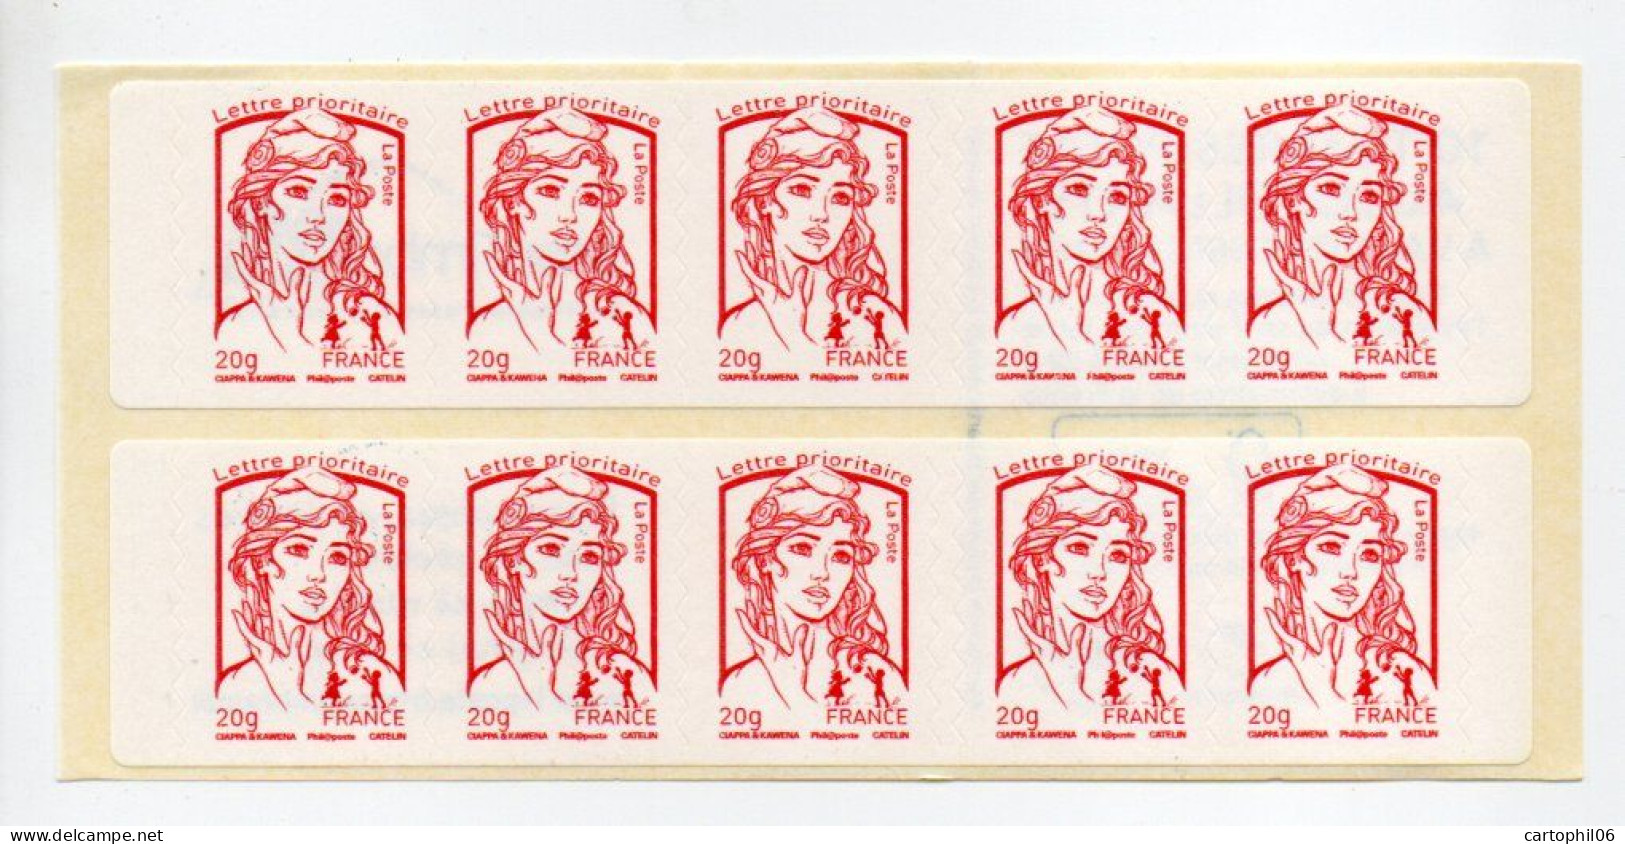 - FRANCE Carnet 10 Timbres Prioritaires Marianne De Ciappa - MON TIMBRAMOI - VALEUR FACIALE 14,30 € - - Modern : 1959-…